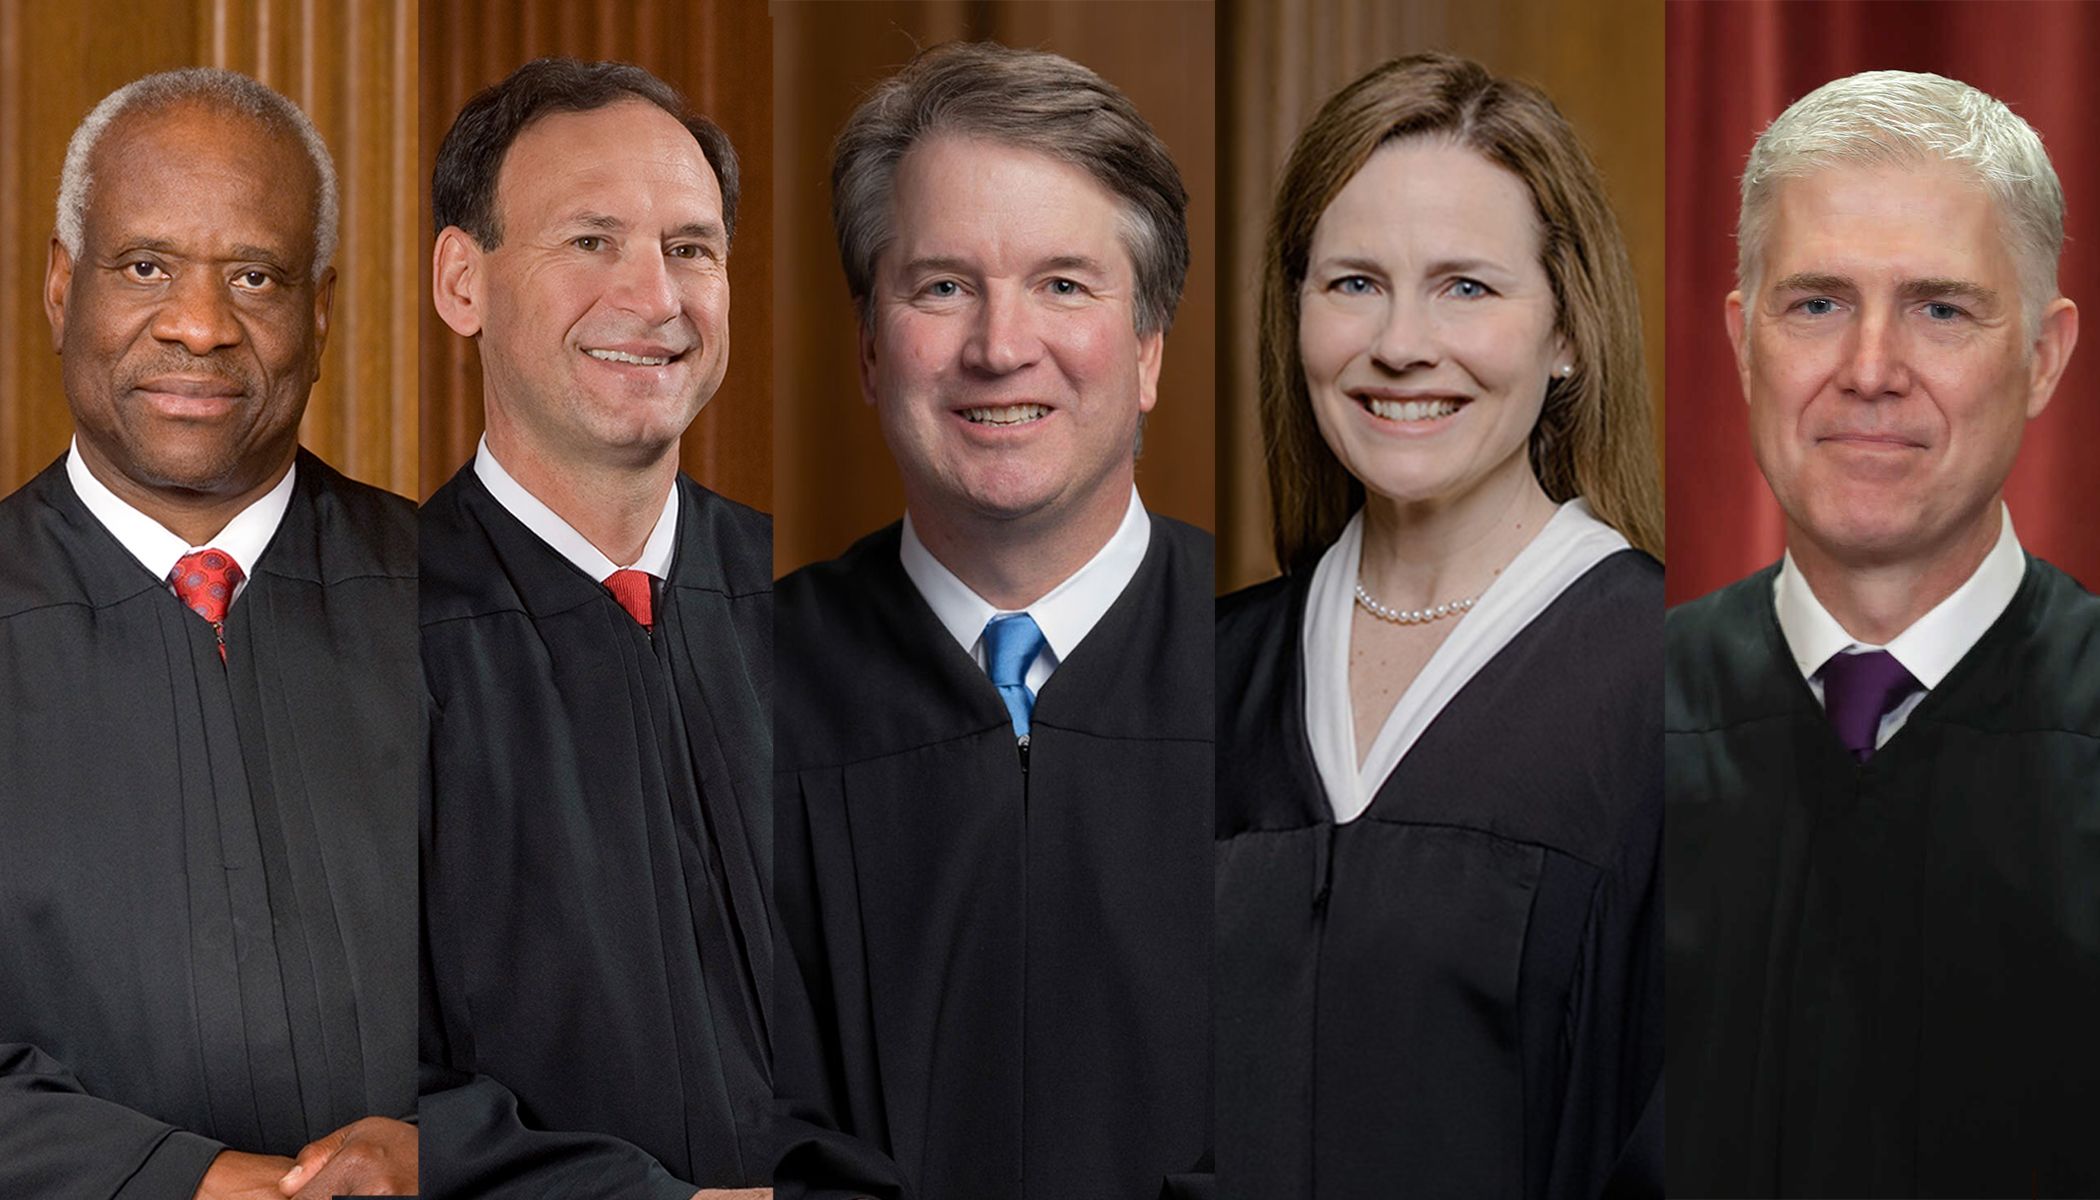 read-about-the-five-supreme-court-justices-who-voted-to-overturn-roe-v